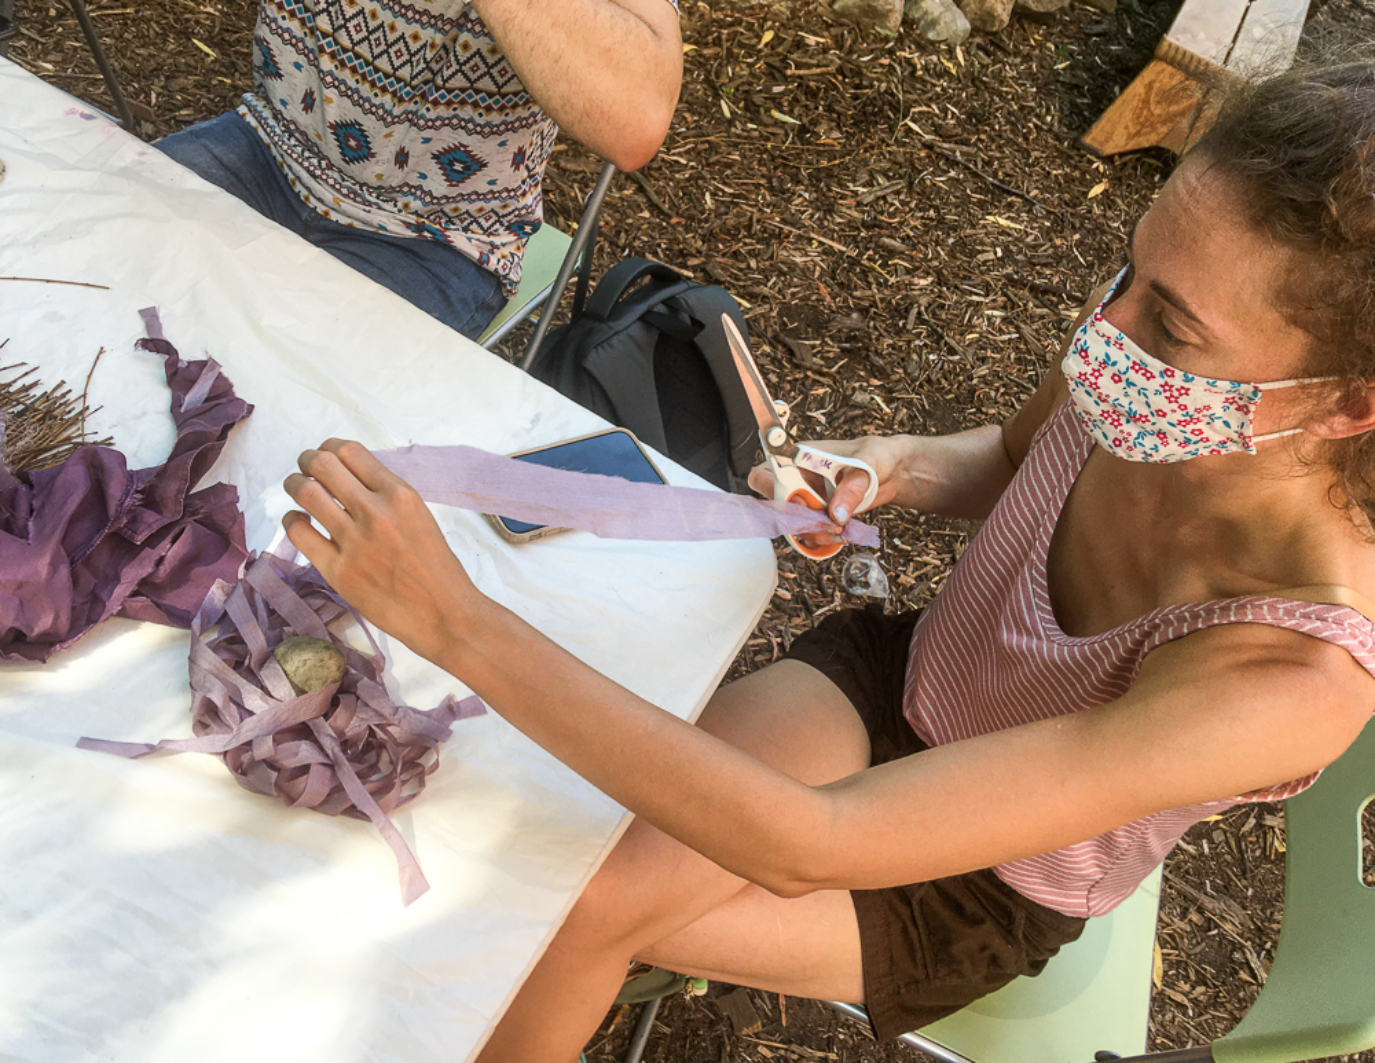 One artist/volunteer is cutting strips of lavender colored materials. She is masked and wears a red striped shirt.